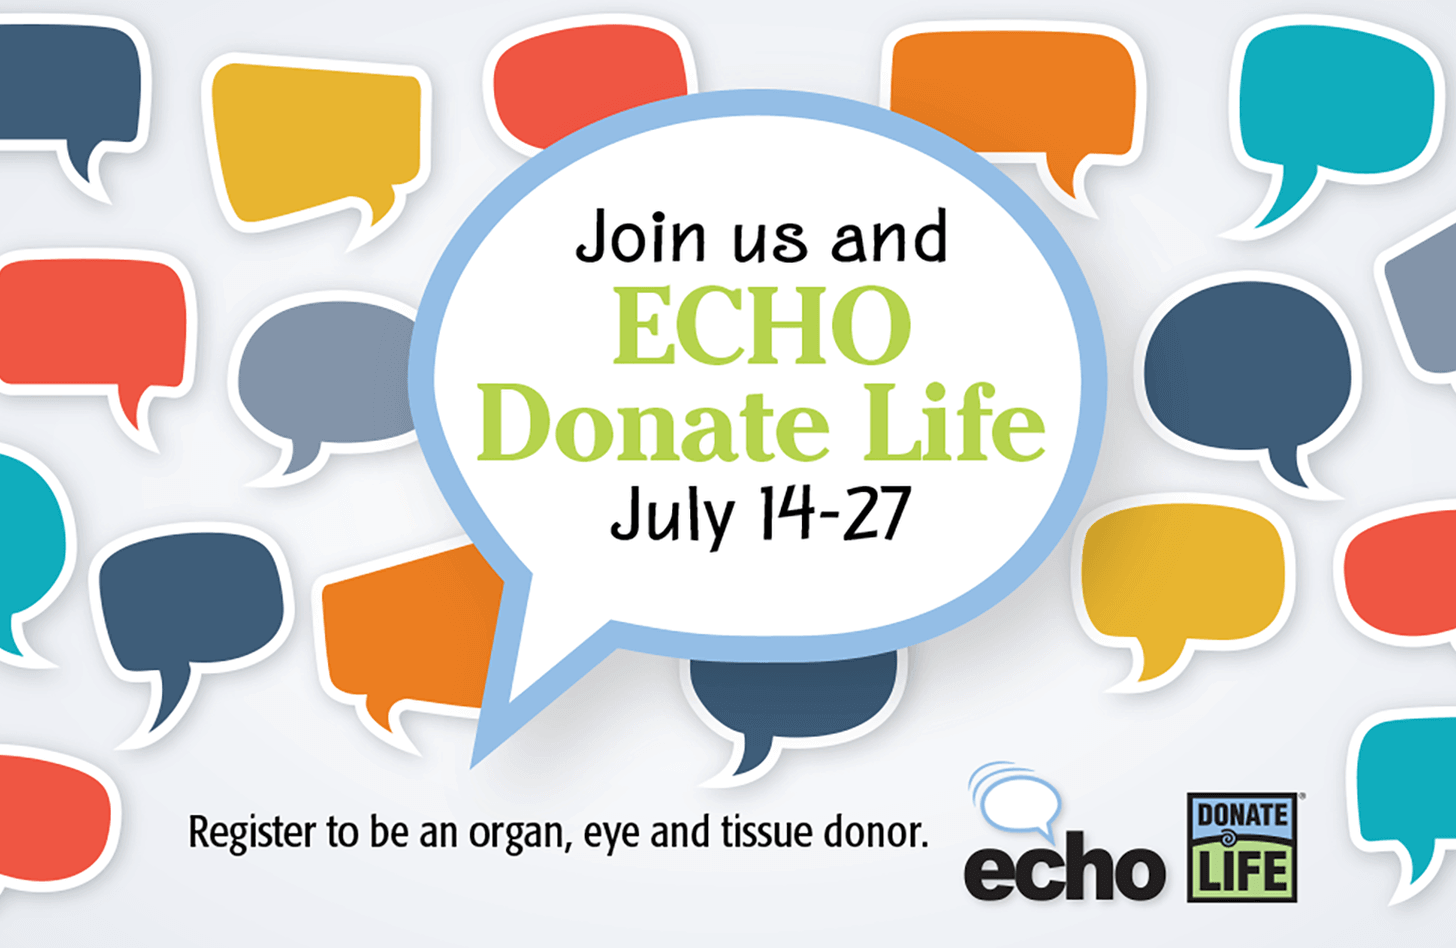 Join us and ECHO Donate Life July 14-27